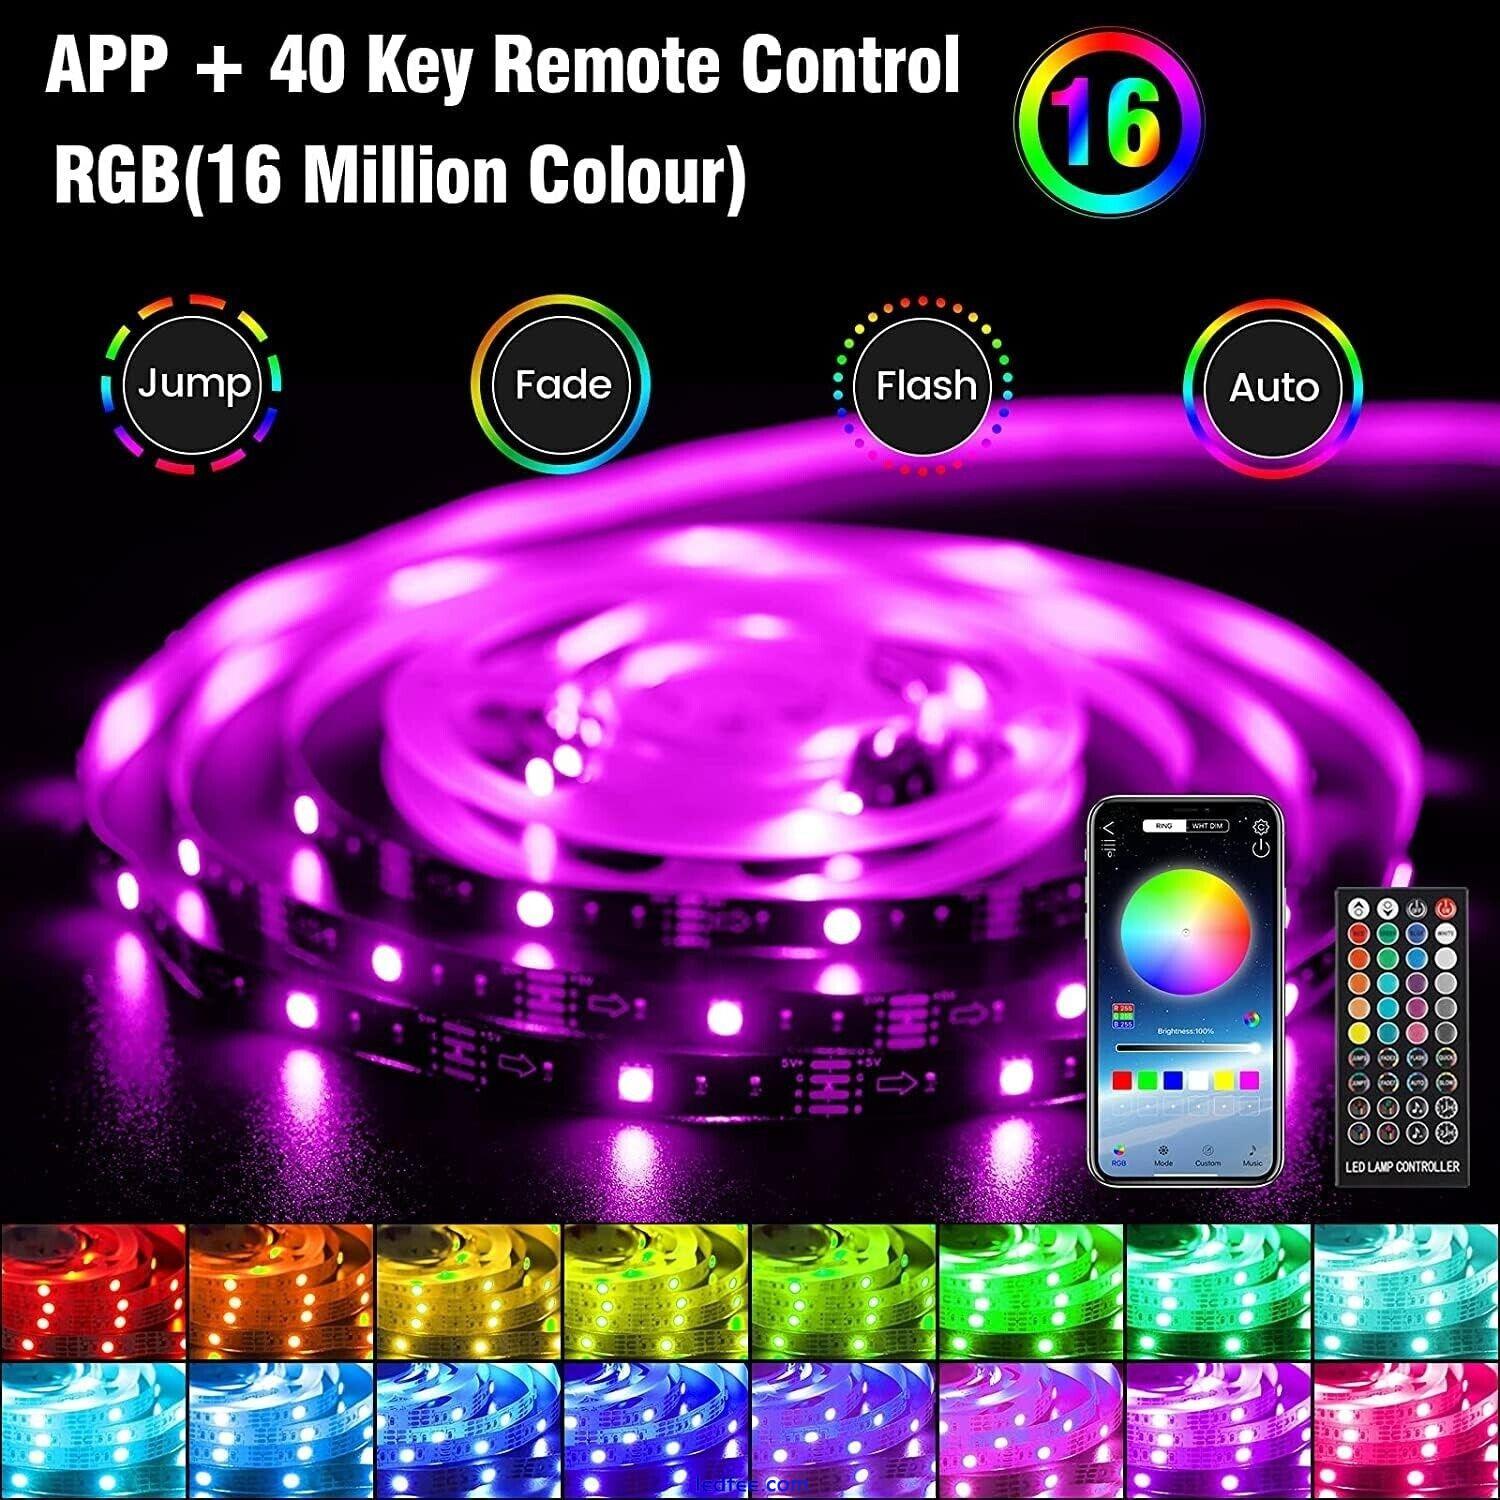 LED Strip Light 5M/16.4 ft, RGB LED Lights for Kitchen, Party, TV with Remote 4 